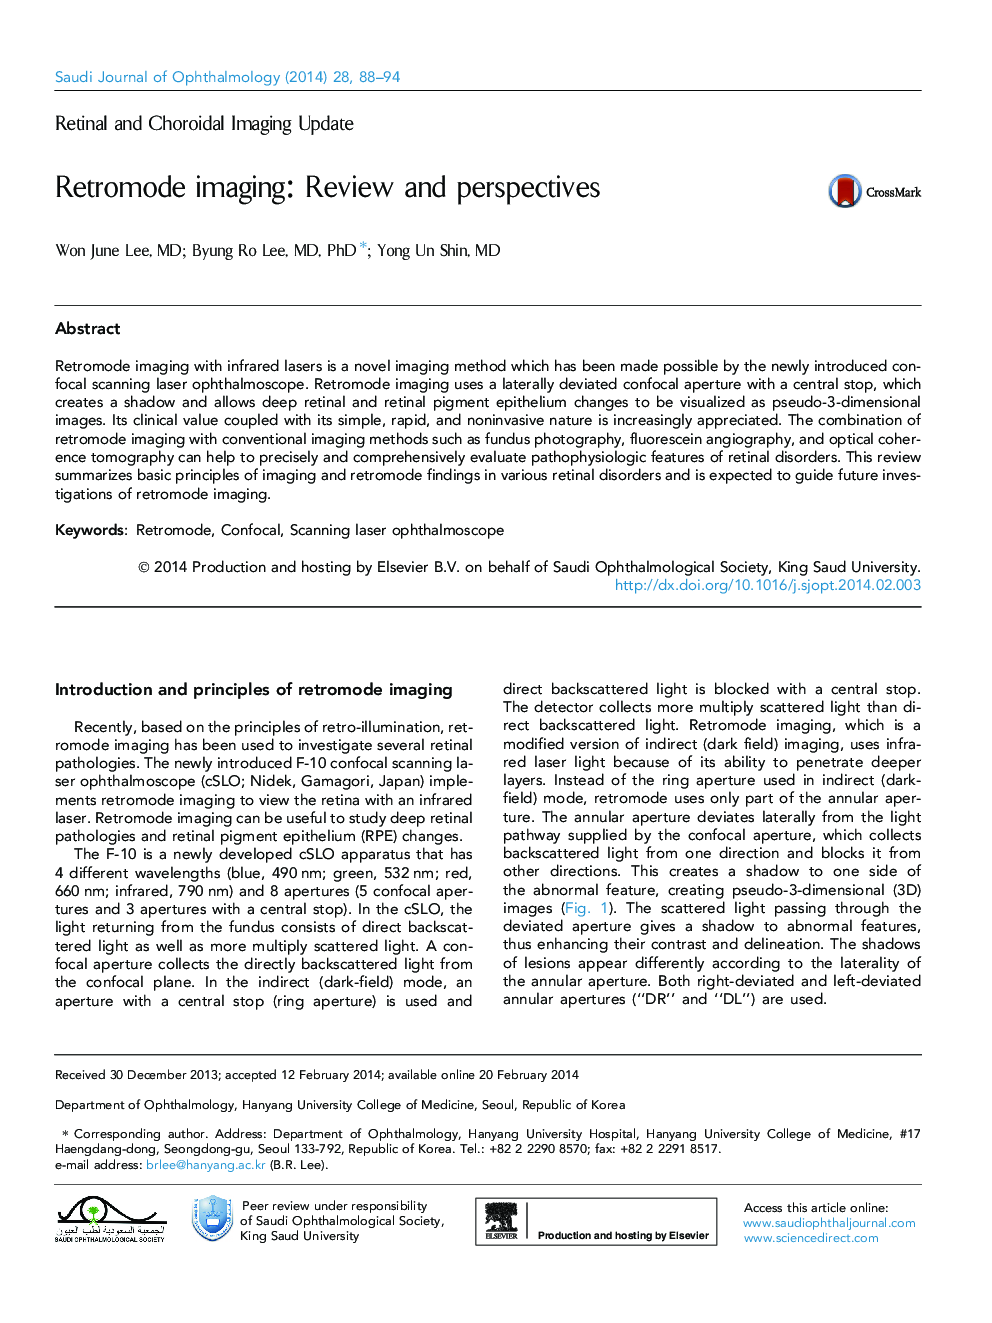 Retromode imaging: Review and perspectives 